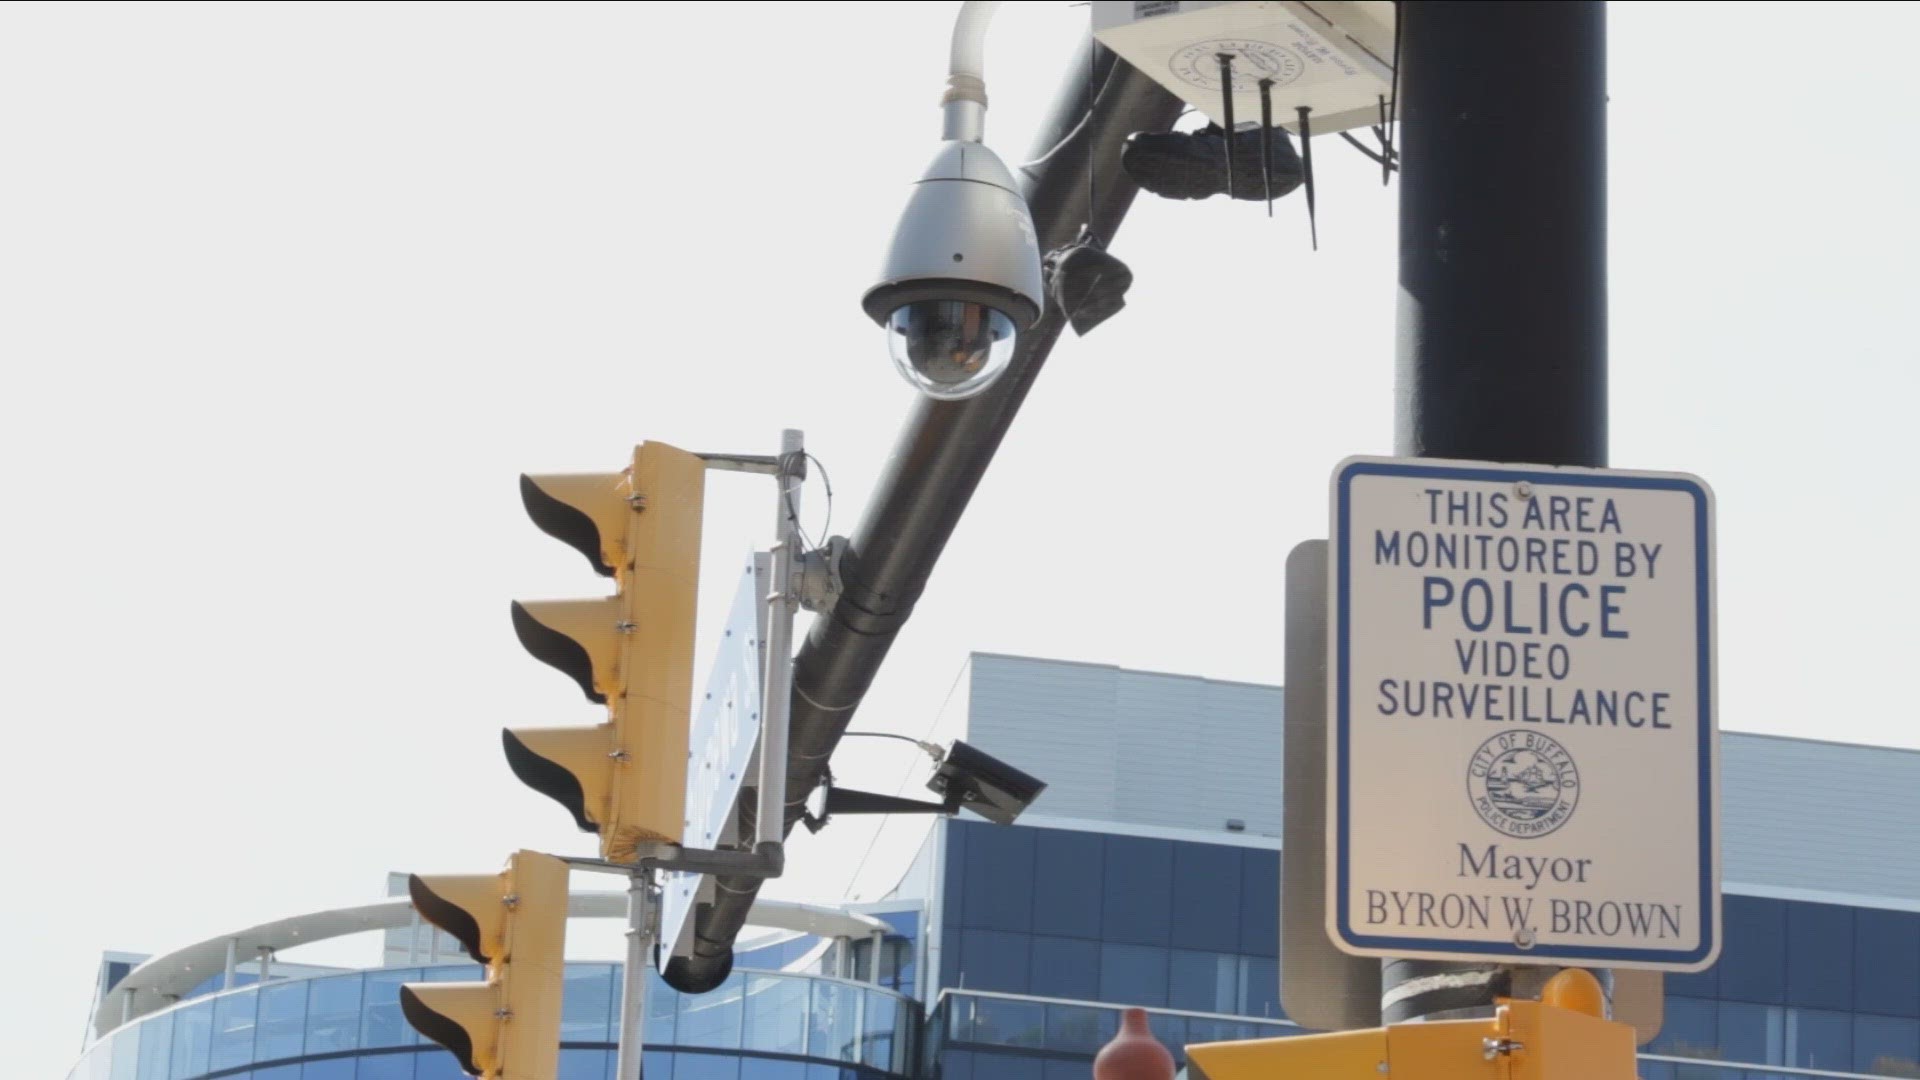 Investigative Post looking into why these license plate readers are installed where they are.